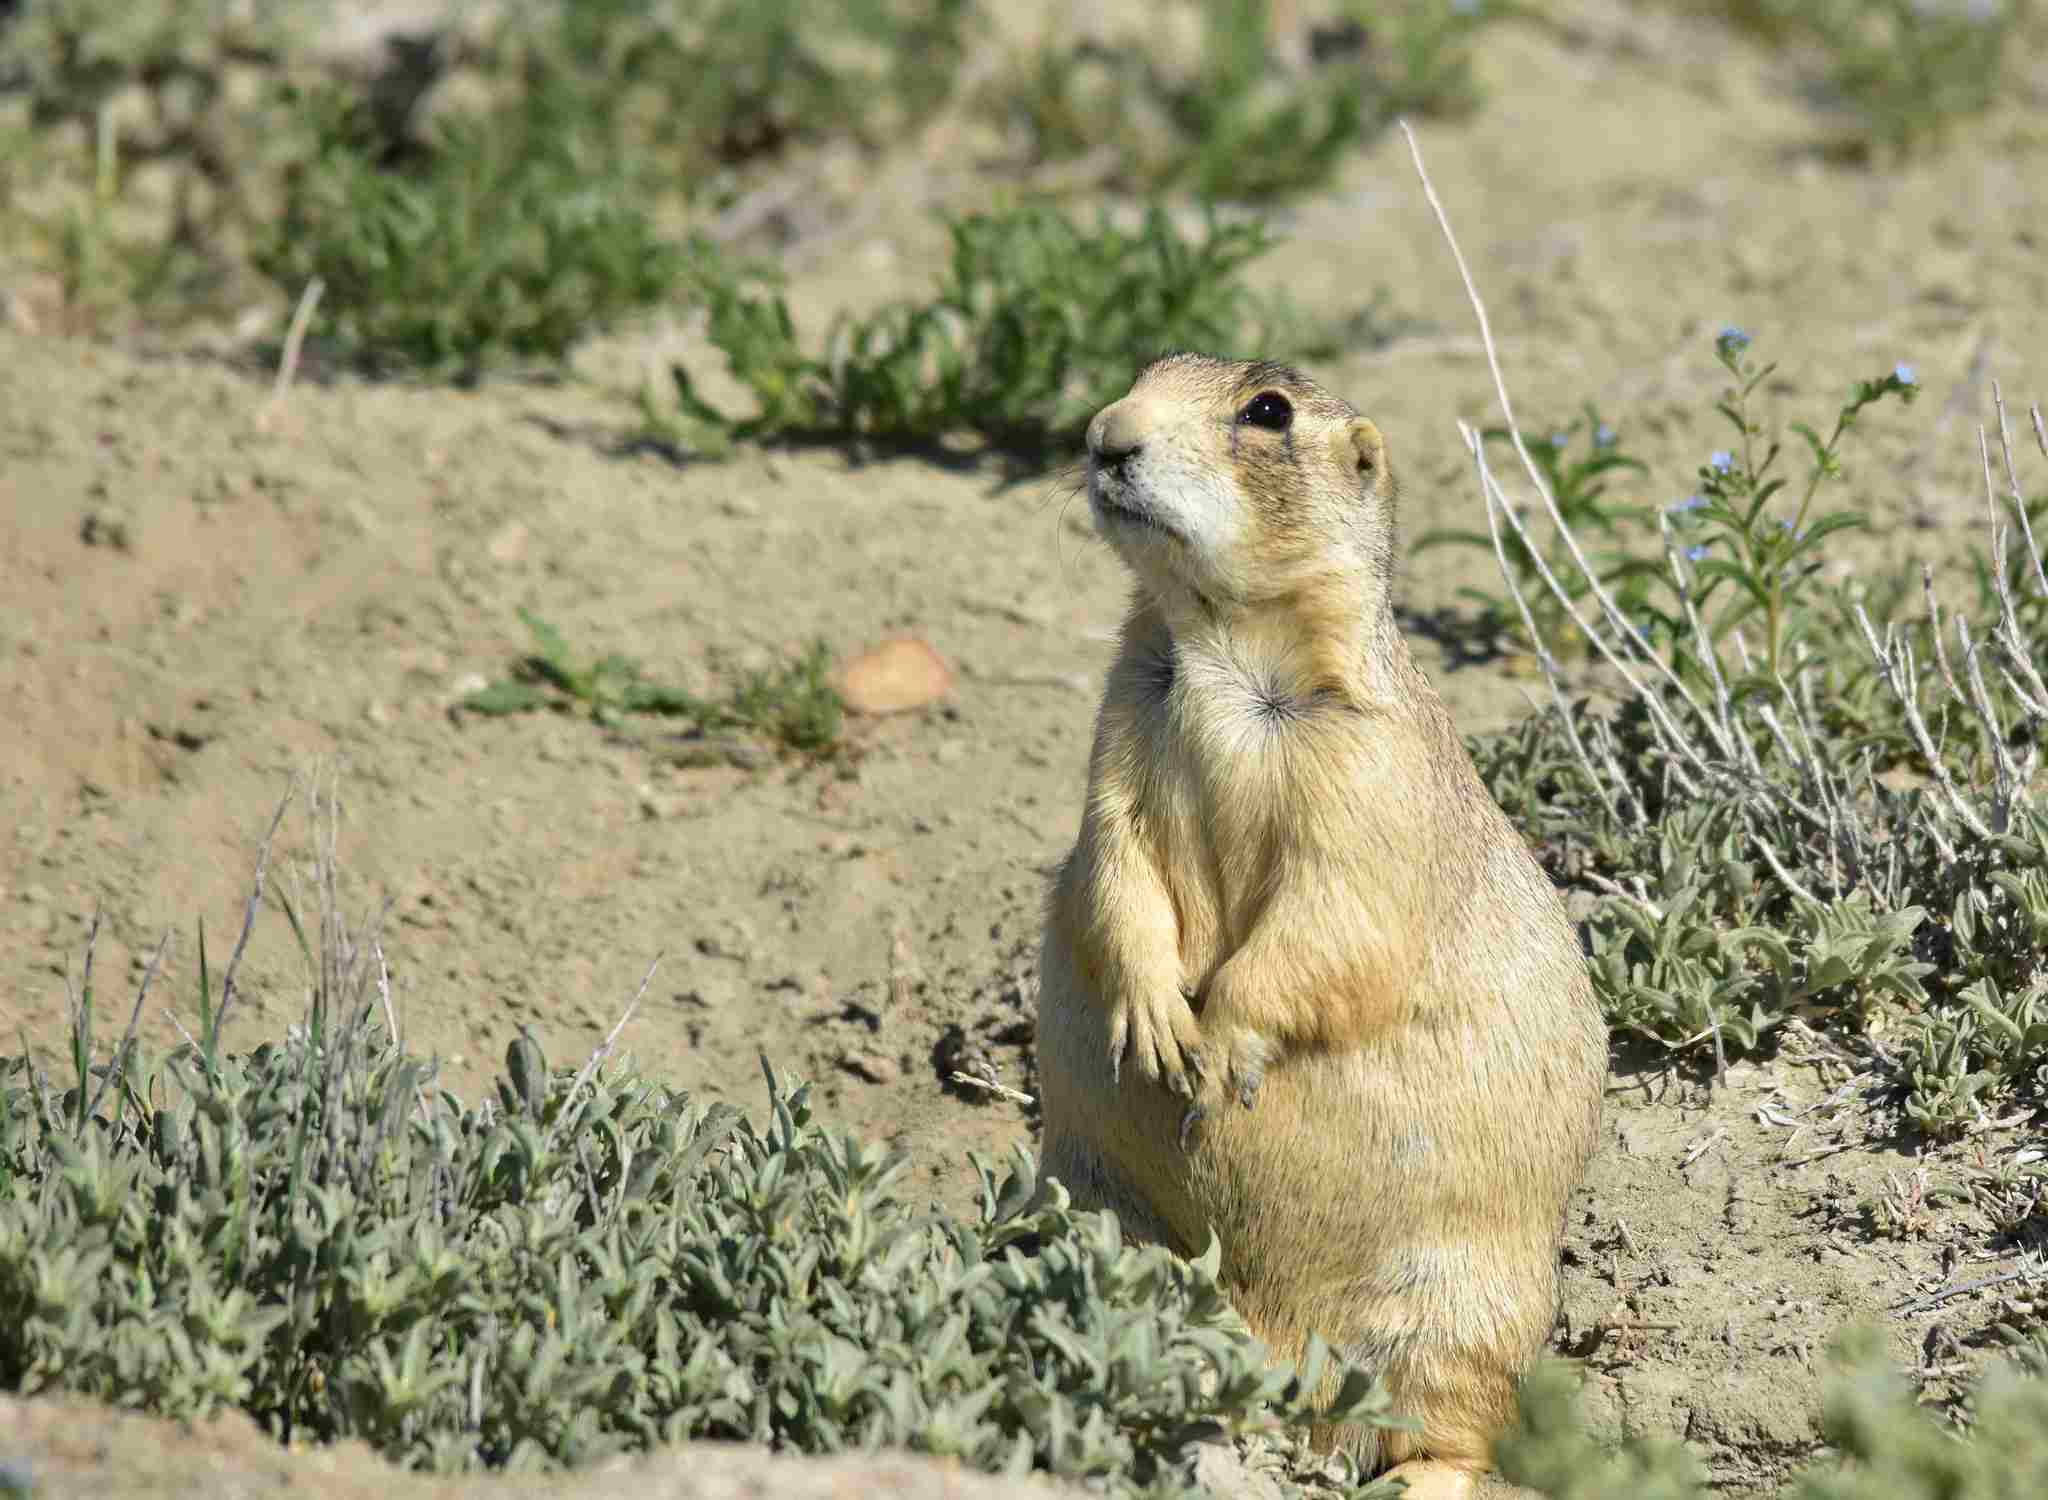 What Do Prairie Dogs Eat: Semiarid and Arid Ecoregions are Home to Prairie Dogs (Credit: USFWS Mountain-Prairie 2017 .CC BY 2.0.)